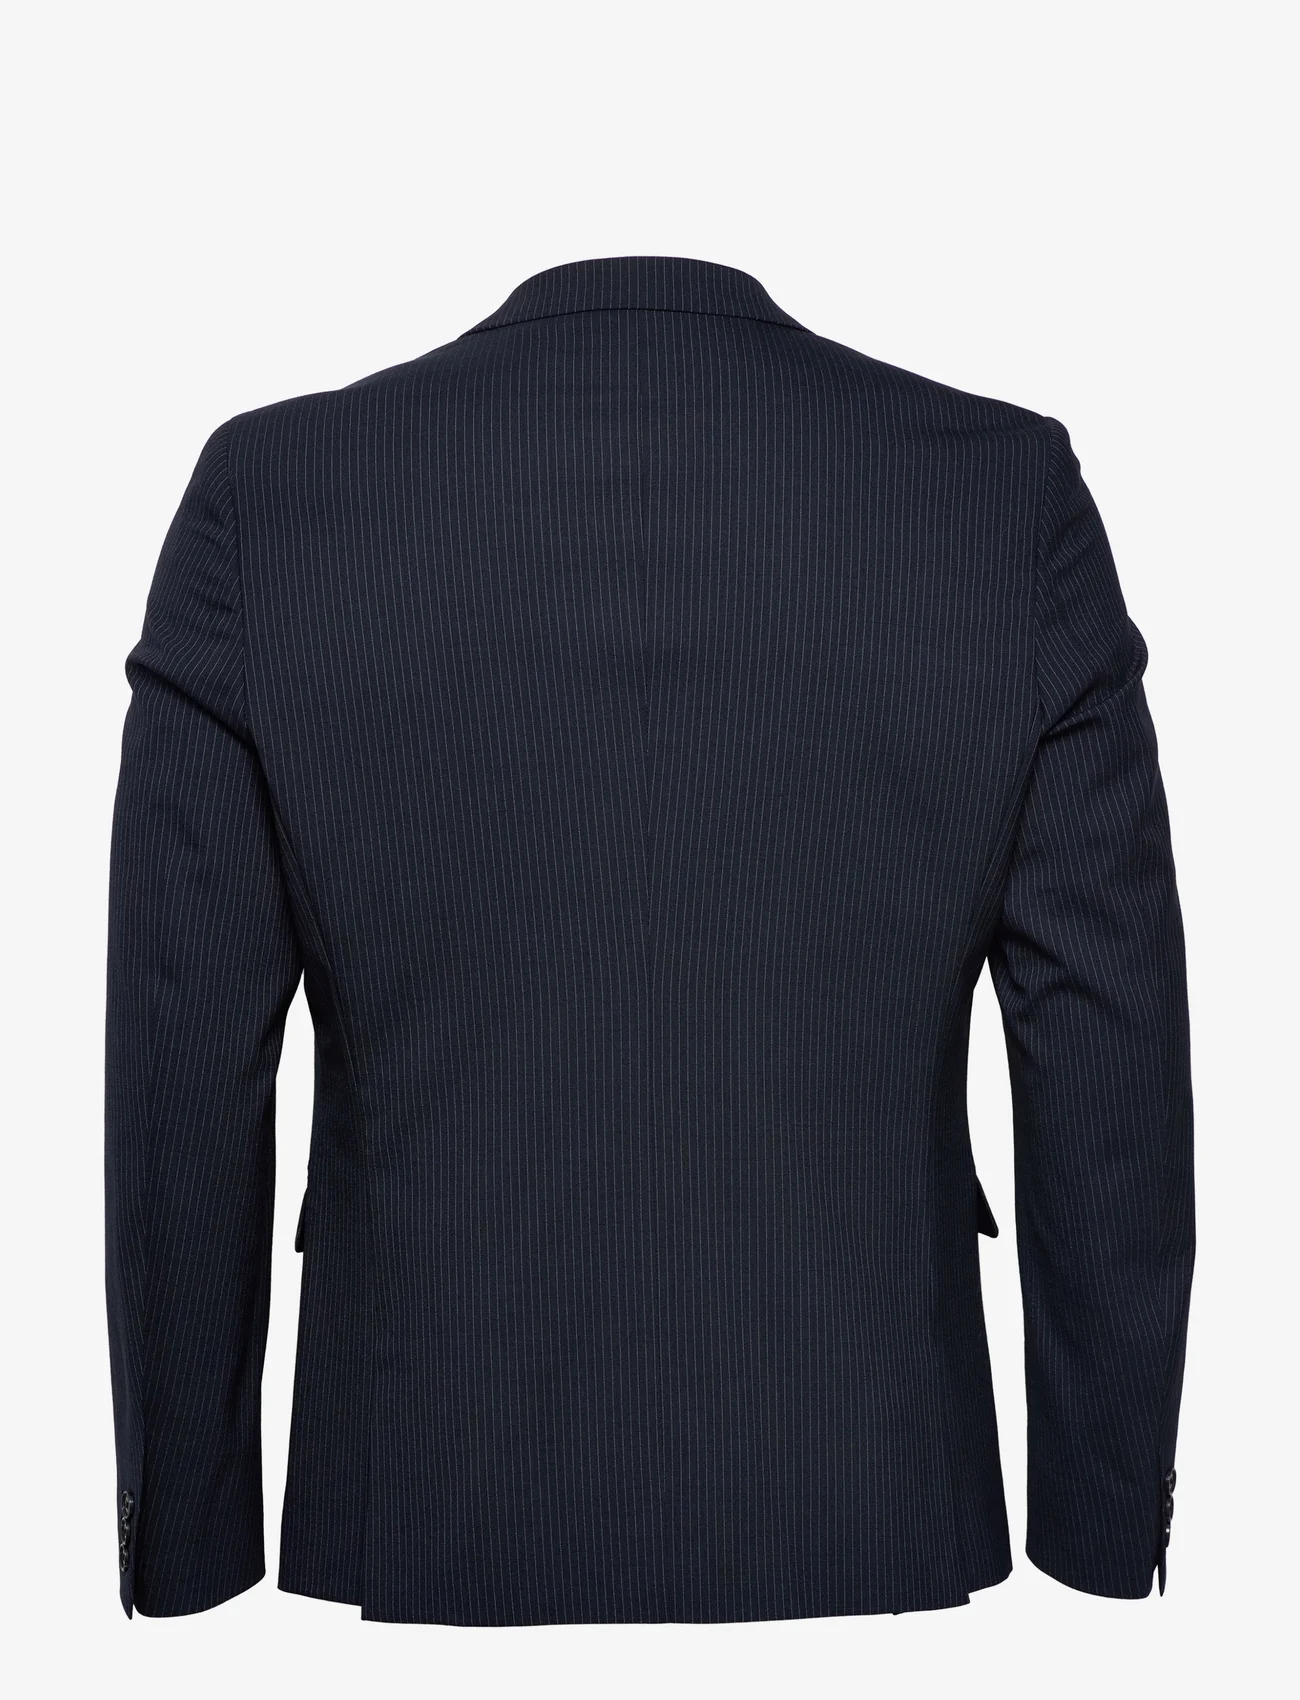 Matinique - MAdouble - double breasted blazers - dark navy - 1